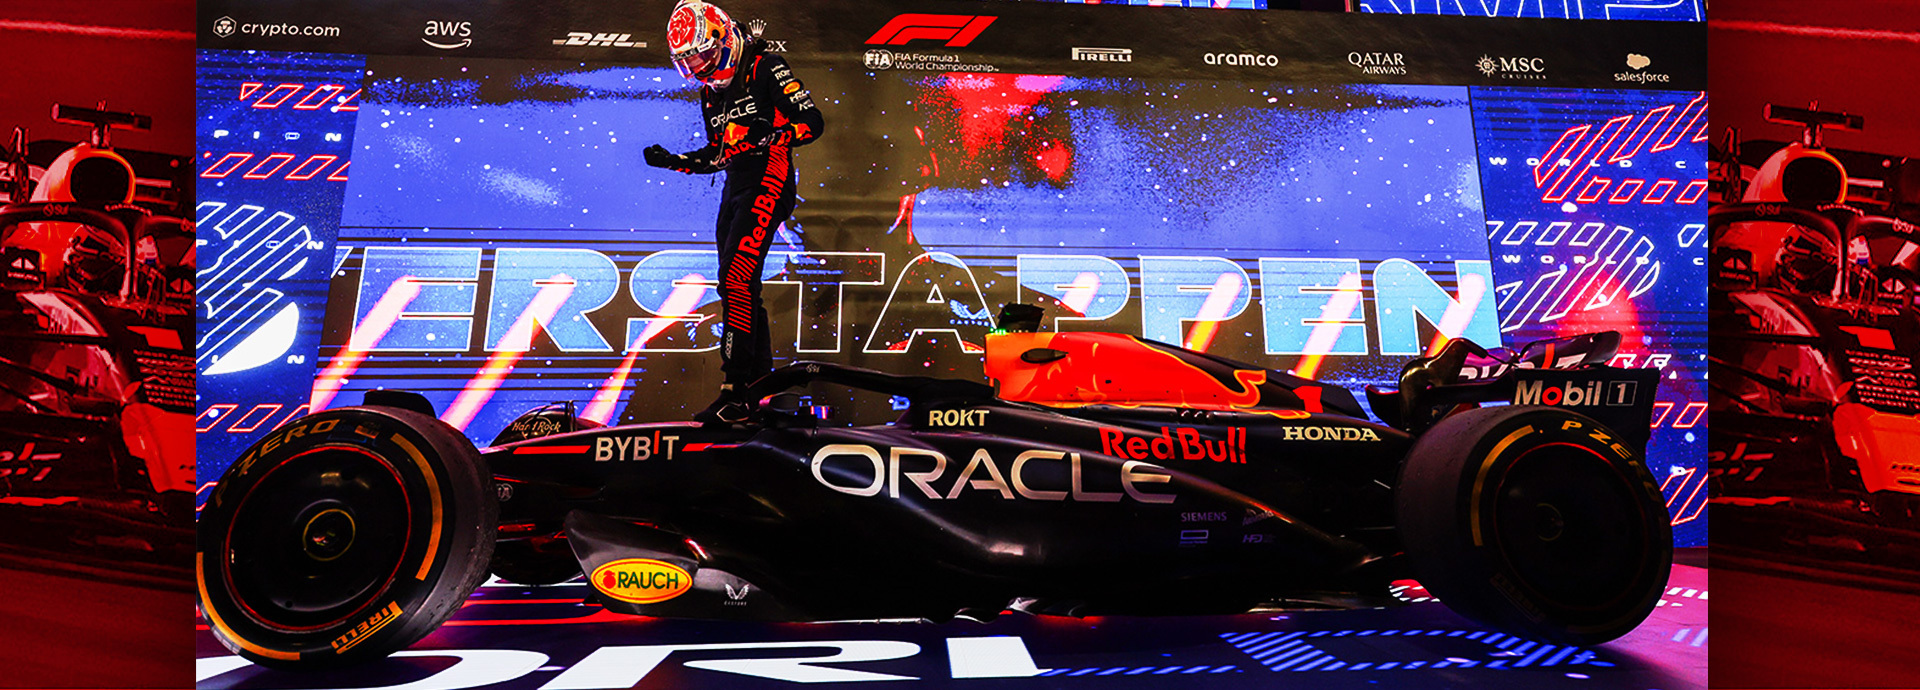 Oracle Red Bull Racing Driver Max Verstappen Wins Third Consecutive F1 Drivers’ World Championship